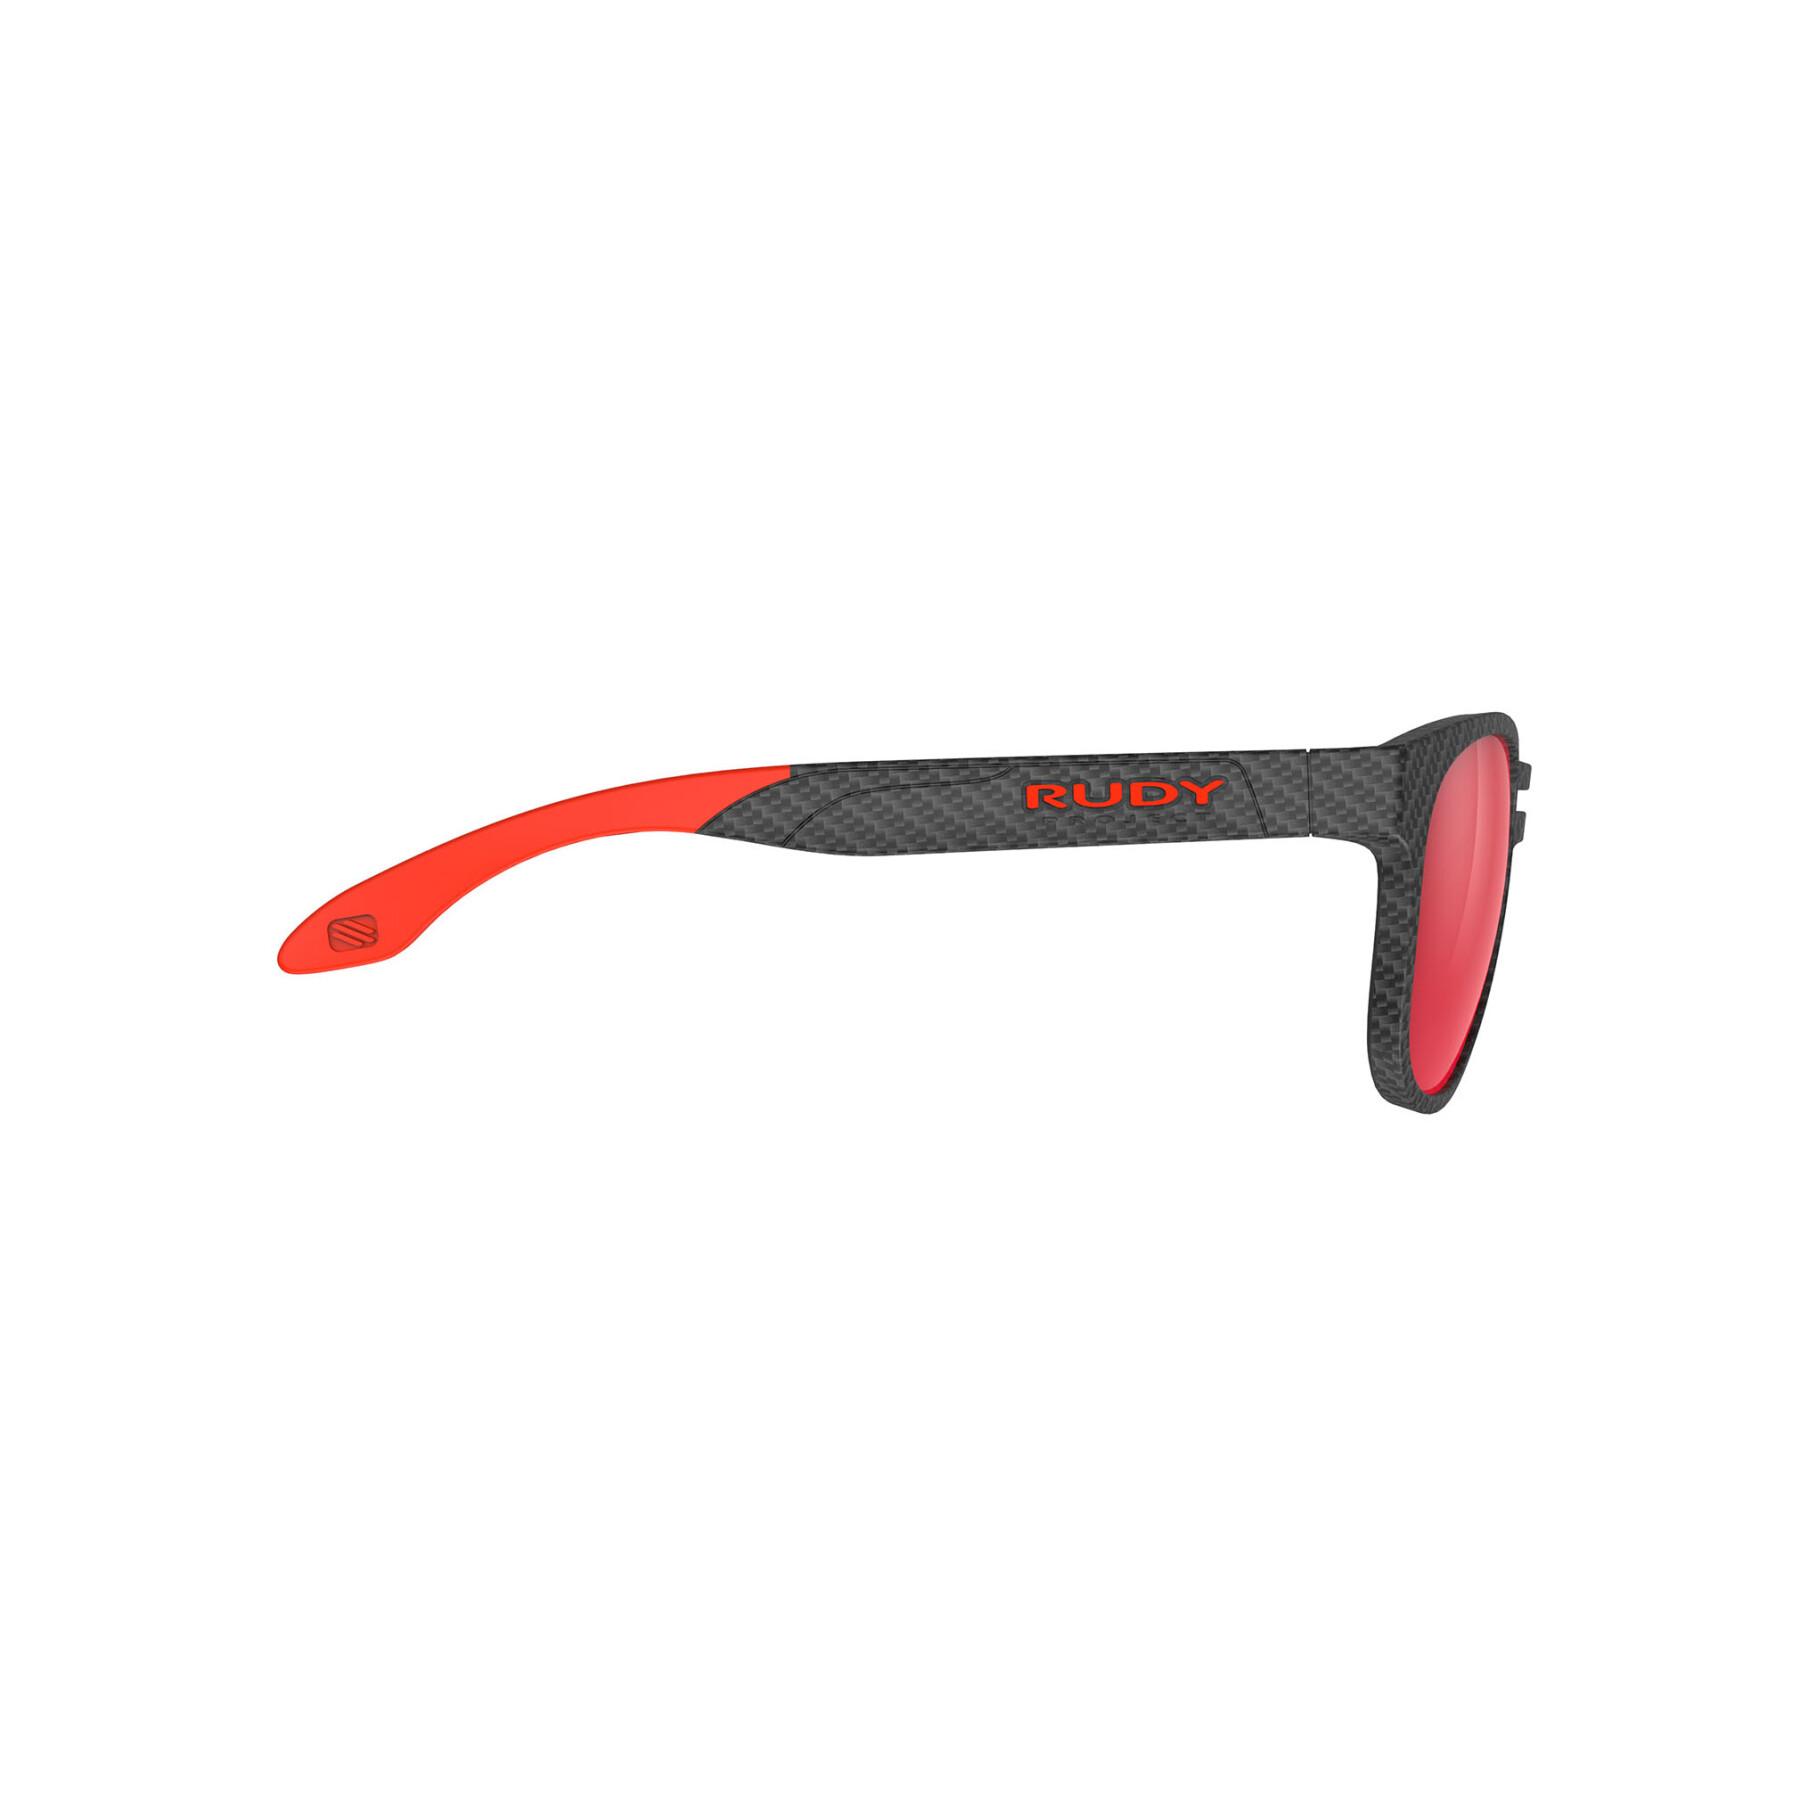 Sonnenbrille Rudy Project spinair 56 water sports